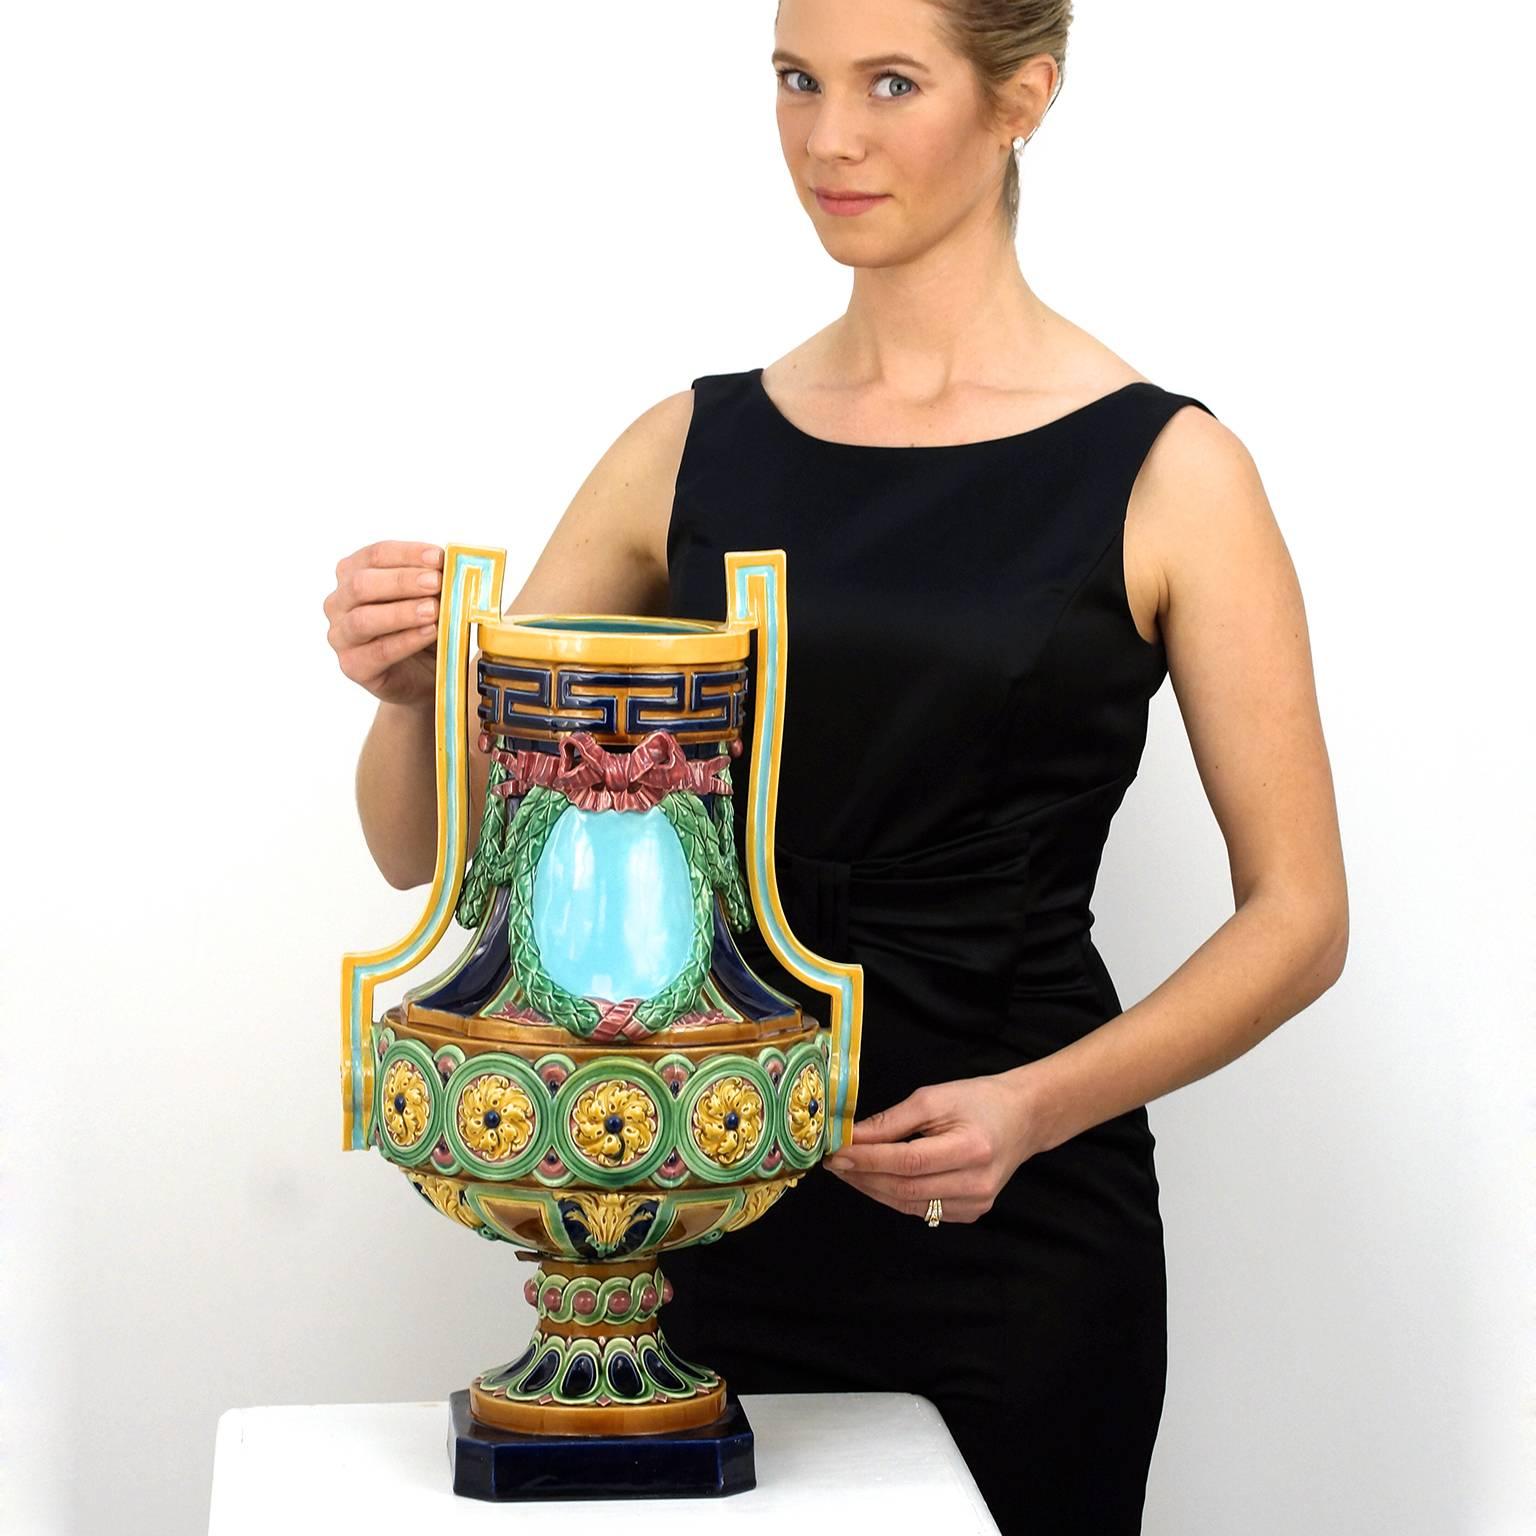 Circa 1870, by Minton, England. A gorgeous example of English porcelain, this monumental vase is a Victorian Aesthetic movement tour de force. Majolica by Minton is known for its delicate colors and tasteful motifs. This spectacular example is a